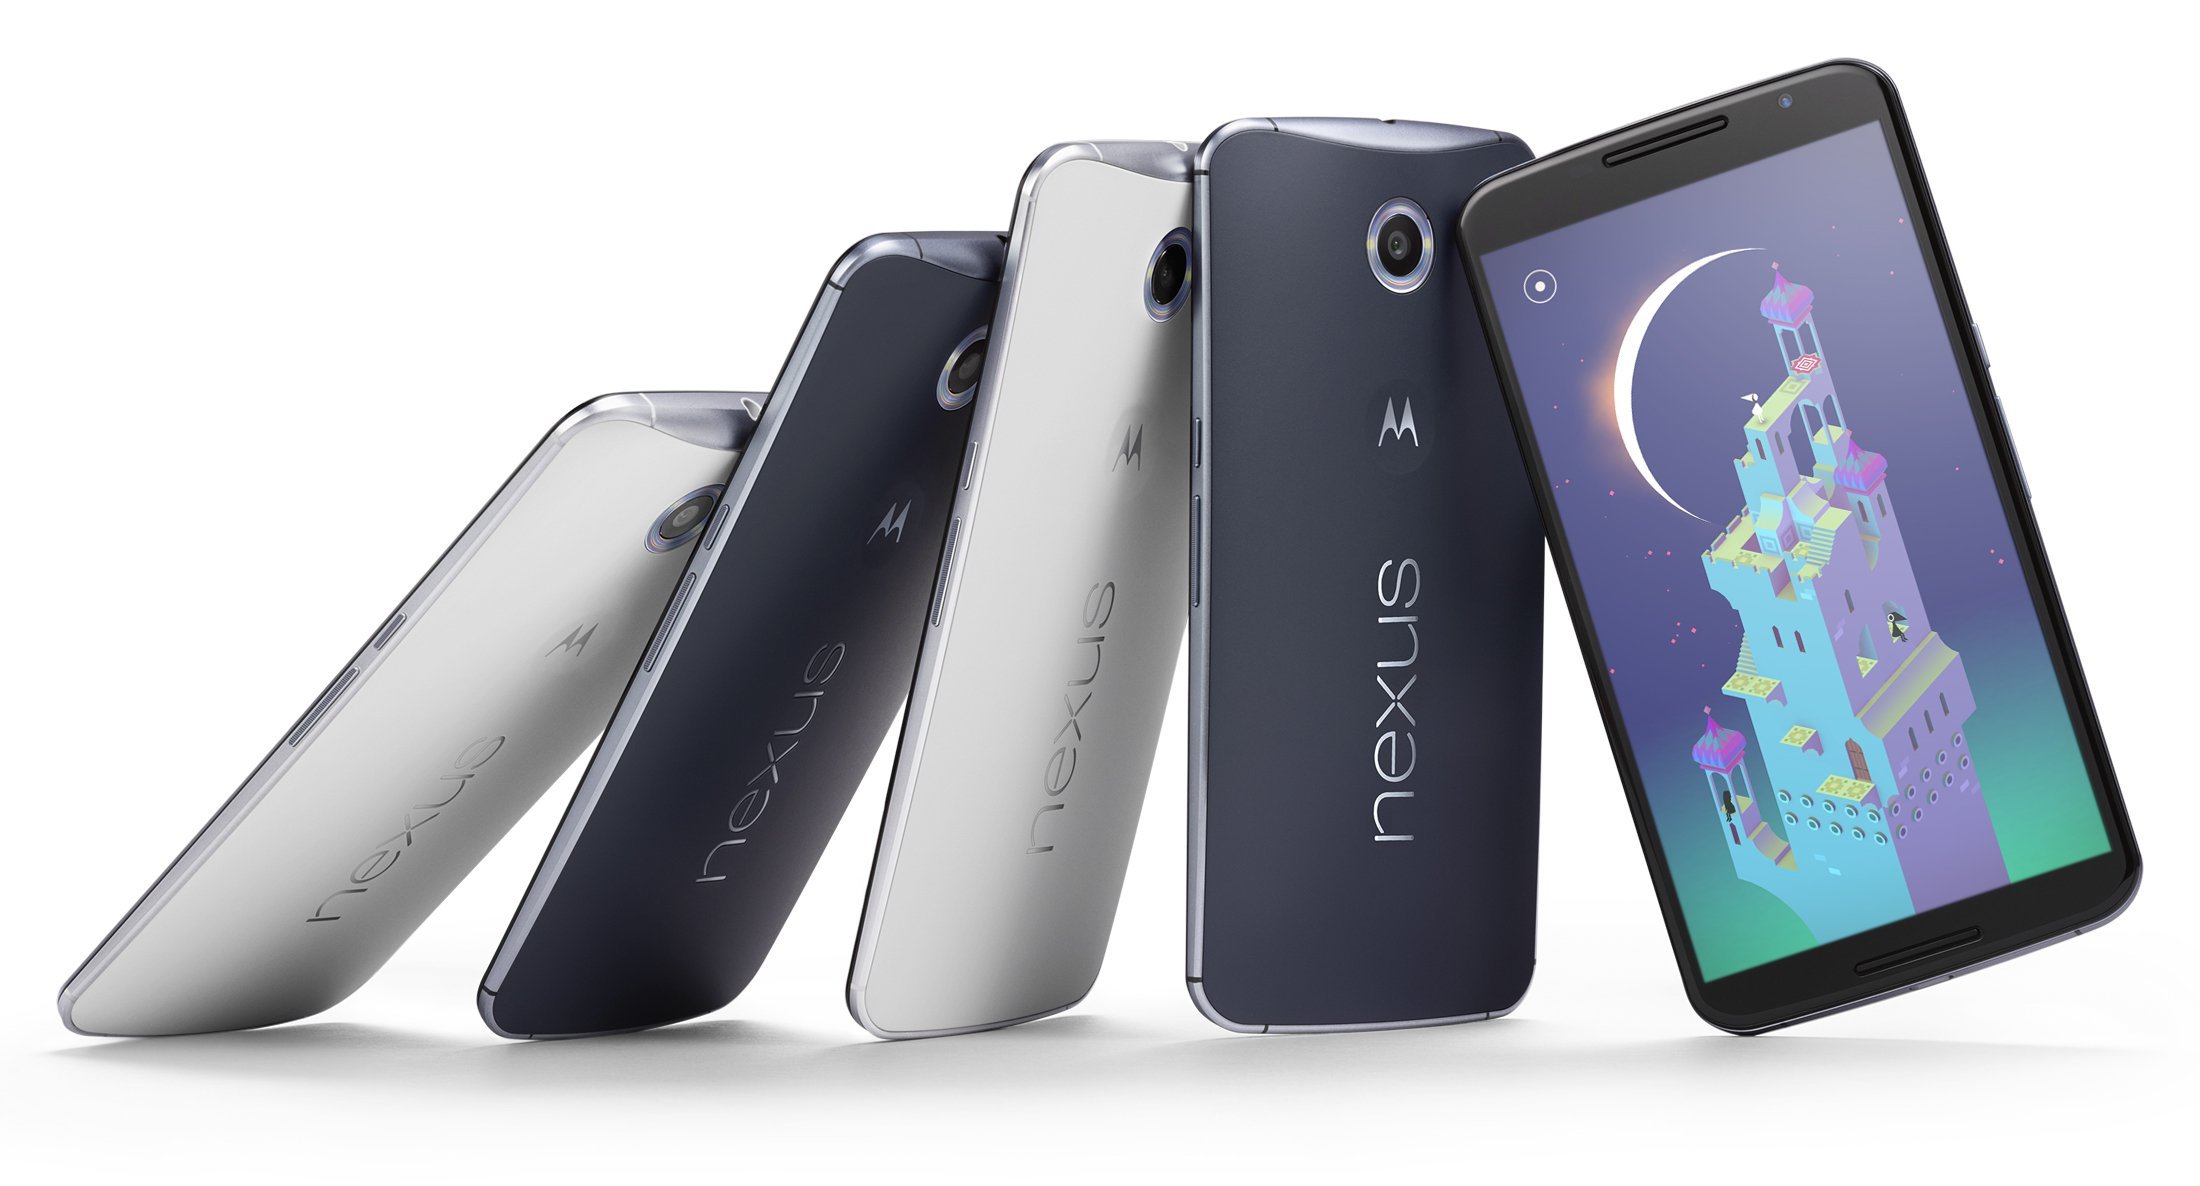 Android 7.0 Nougat Update For Nexus 6